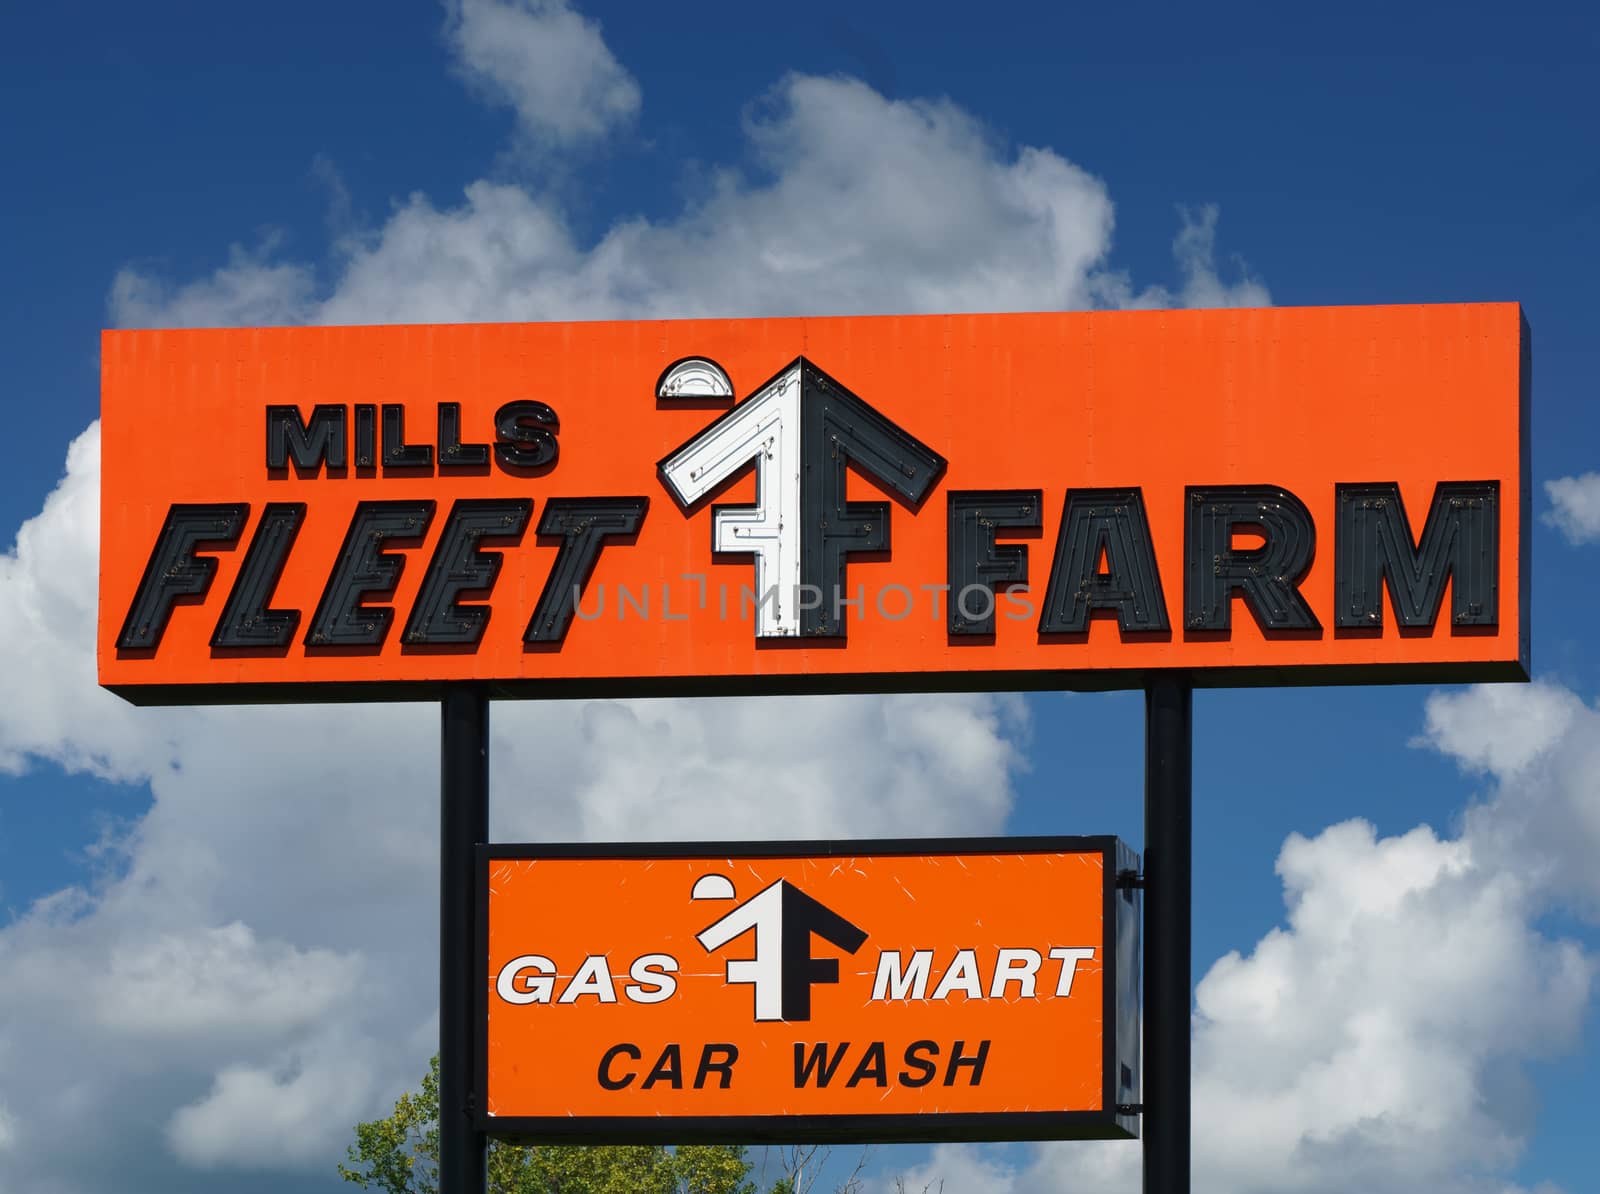 OAKDALE, MN/USA - August 10, 2015: Fleet Farm Store sign and logo. Mills Fleet Farm is a retail chain of 35 stores in the United States.